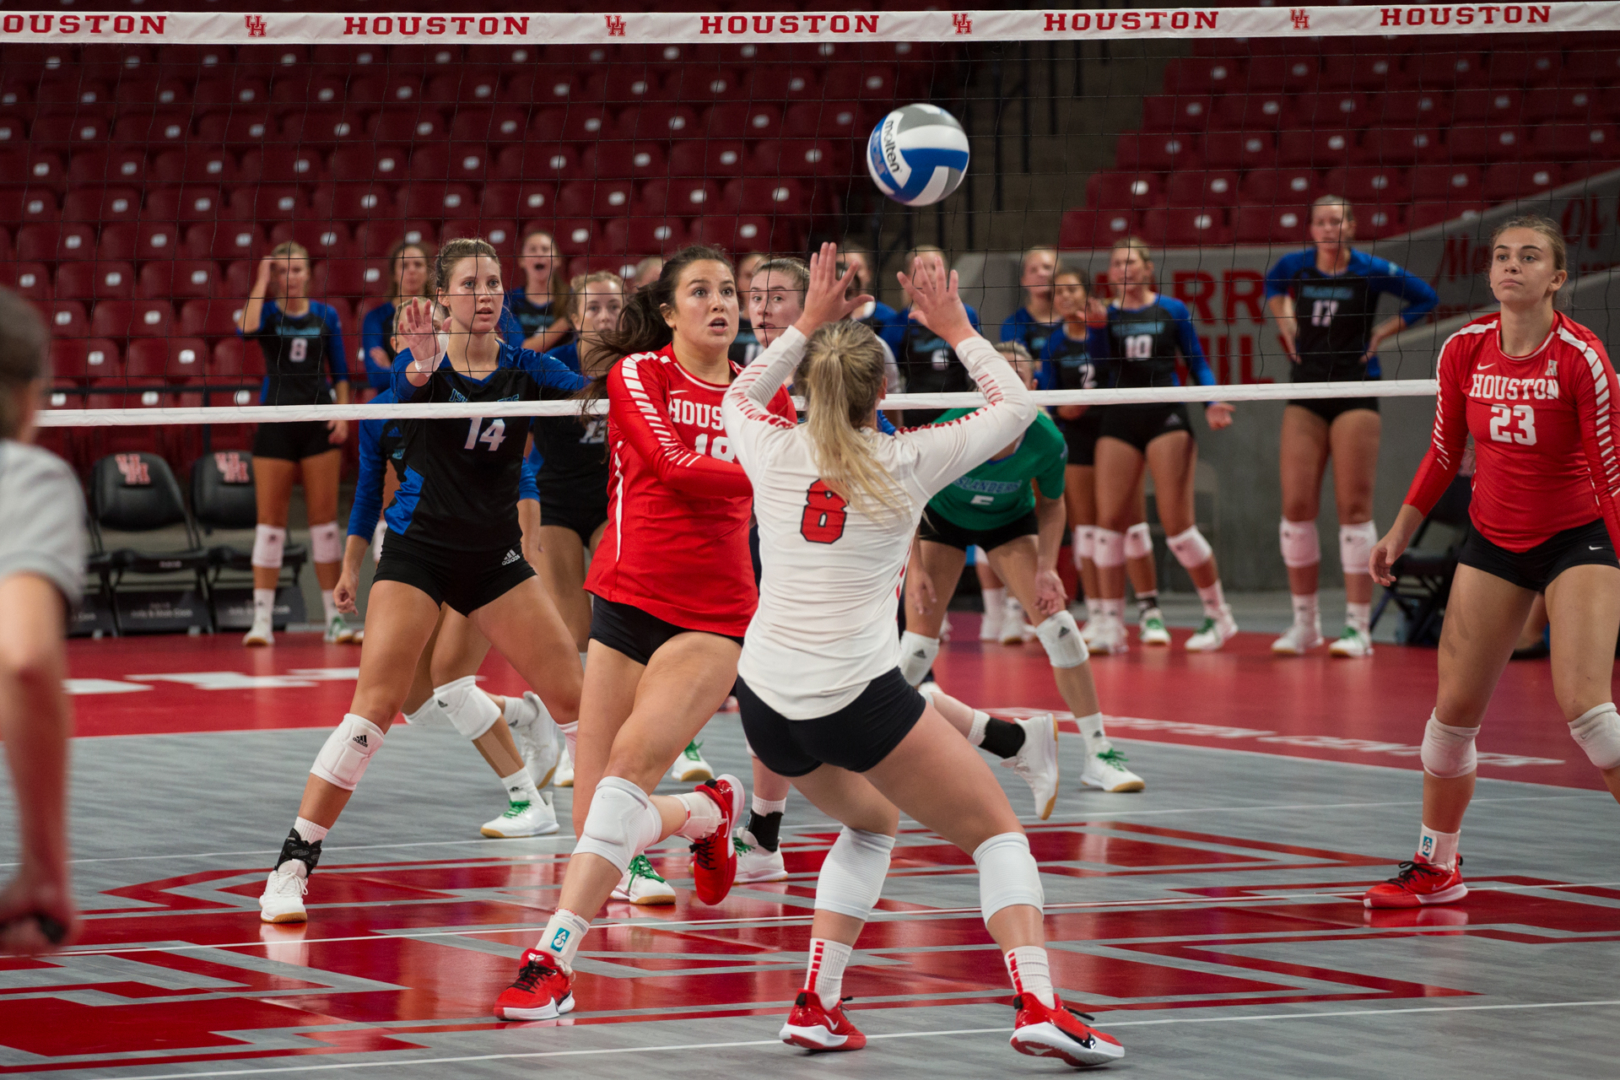 Houston's volleyball team is among the programs affected by the American Athletic Conference's decision on Wednesday. The soccer and cross country teams will also be delayed after the AAC's announcement. | Trevor Nolley/The Cougar